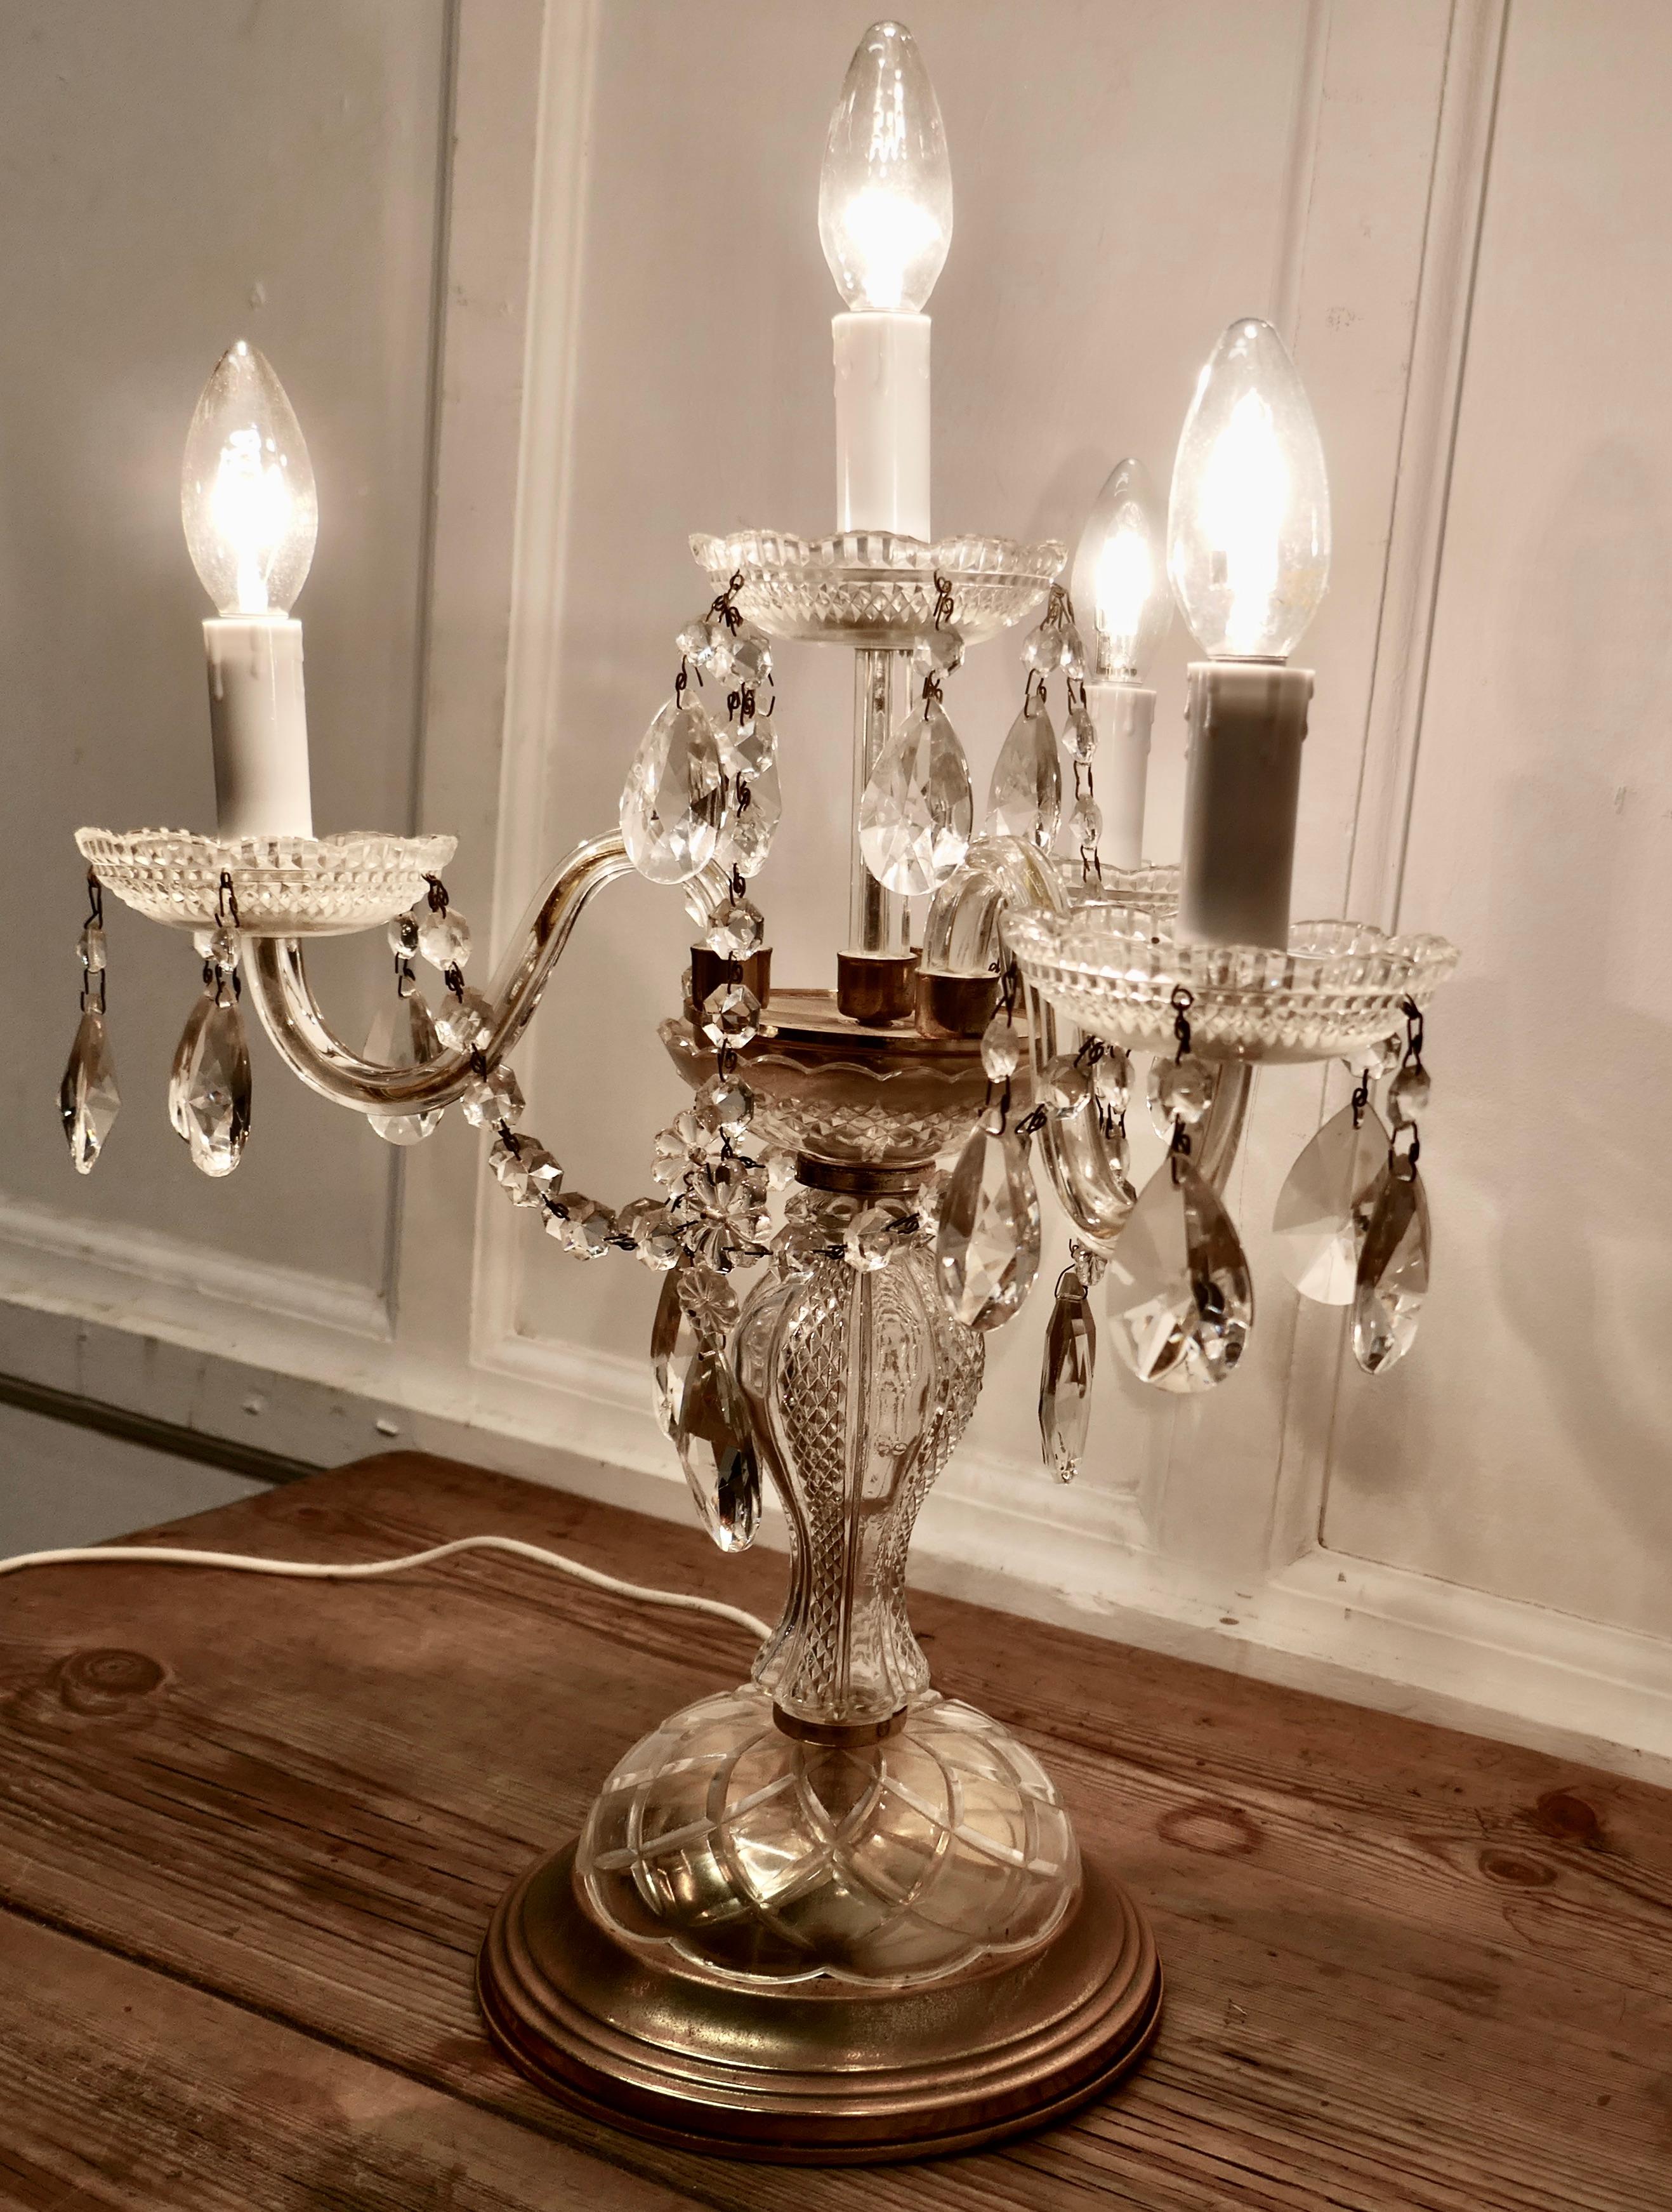 French brass and crystal chandelier table lamp, girandole

This is a lovely piece, the lamp is lit with 3 lamps, it has a decorative brass base with a glass upright central column supporting a superb brass and crystal lustre hung chandelier

The